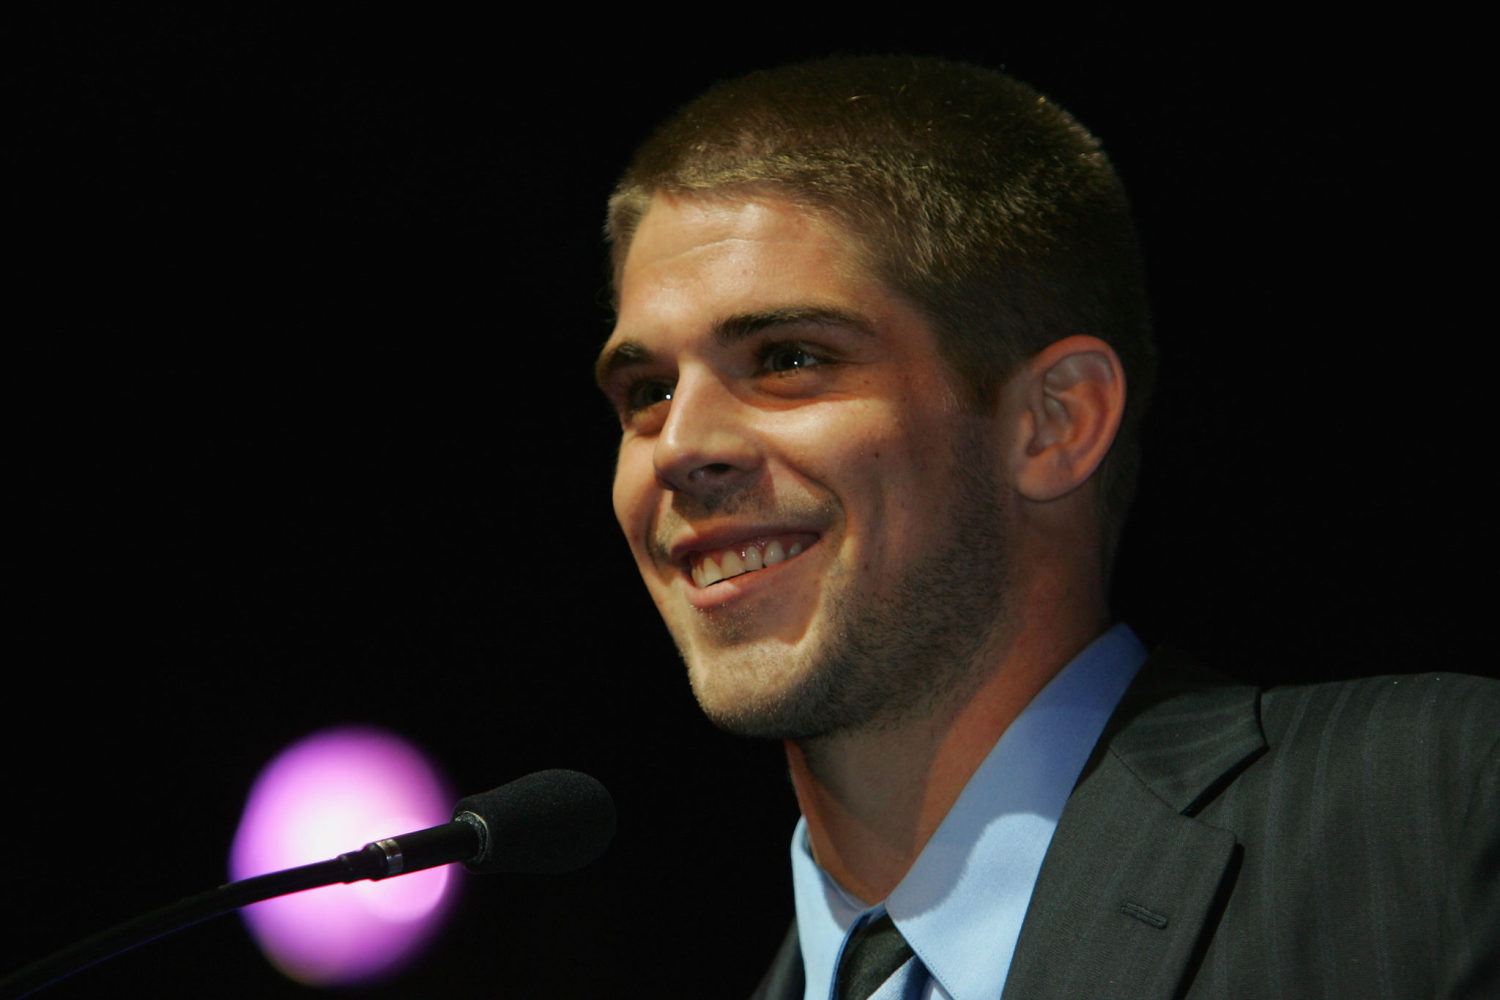 Colt Brennan's family, friends and coaches talk about what was lost